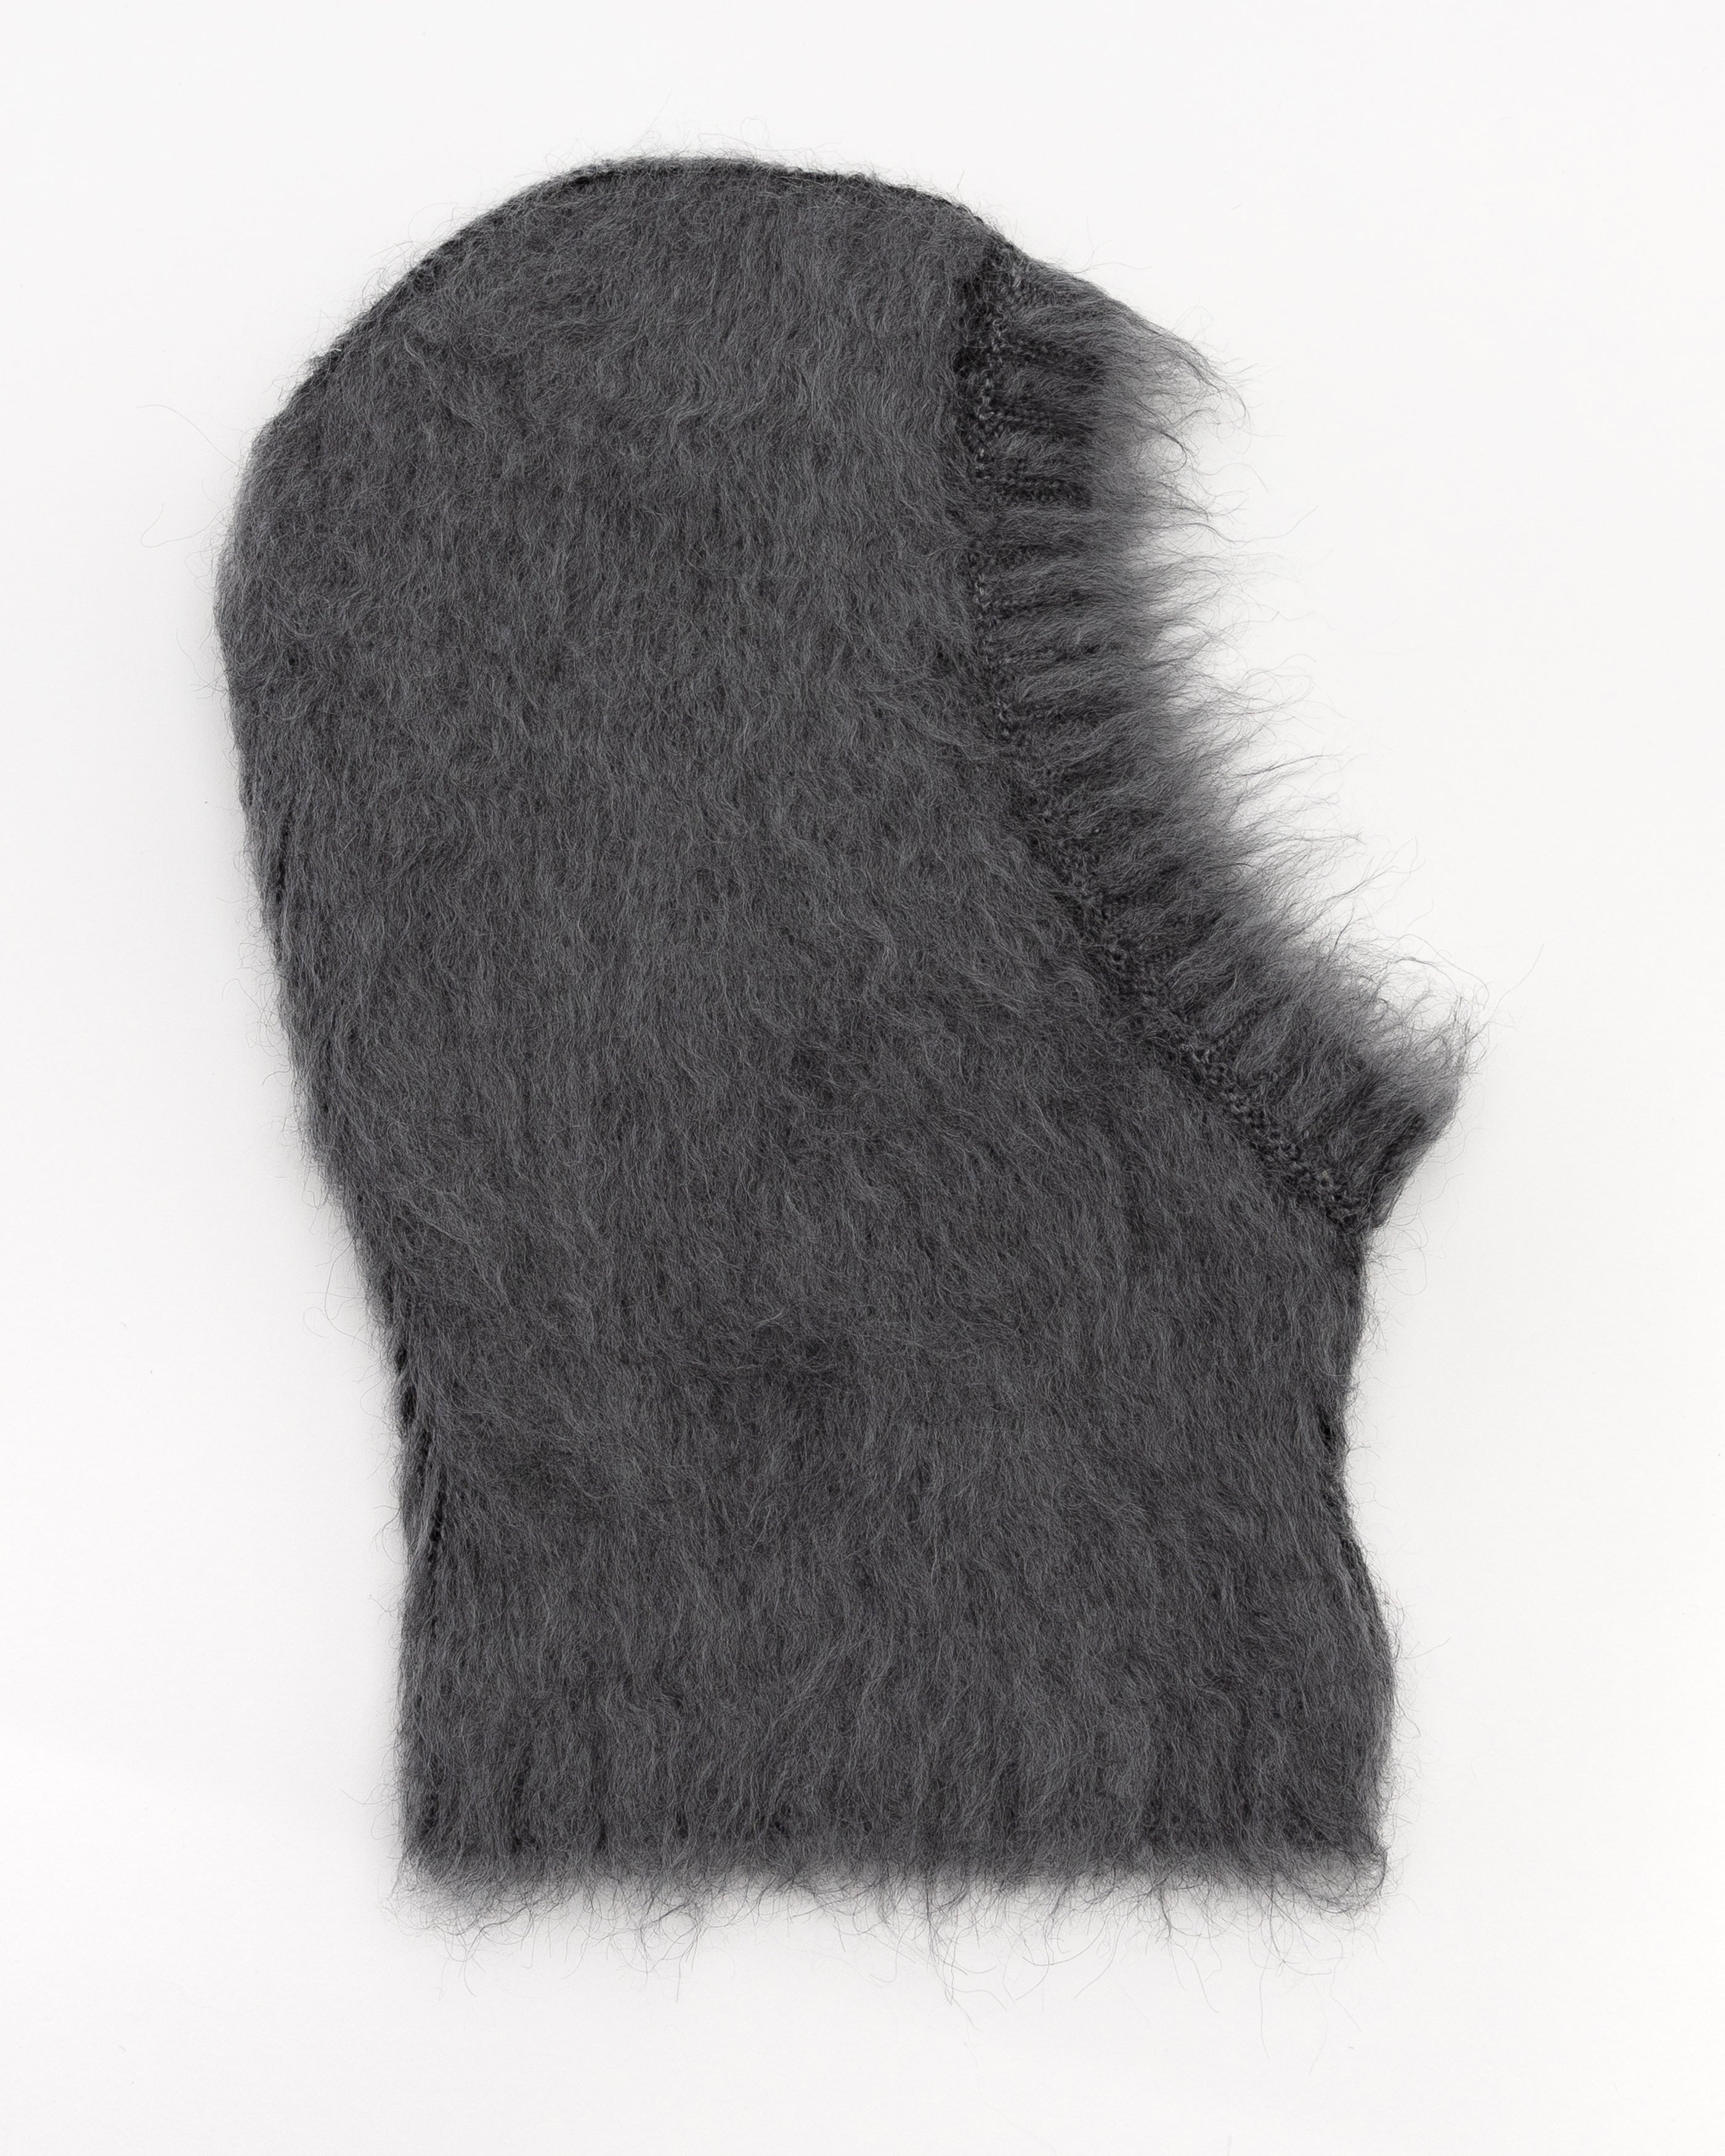 Brushed Mohair Mask in Black and Grey